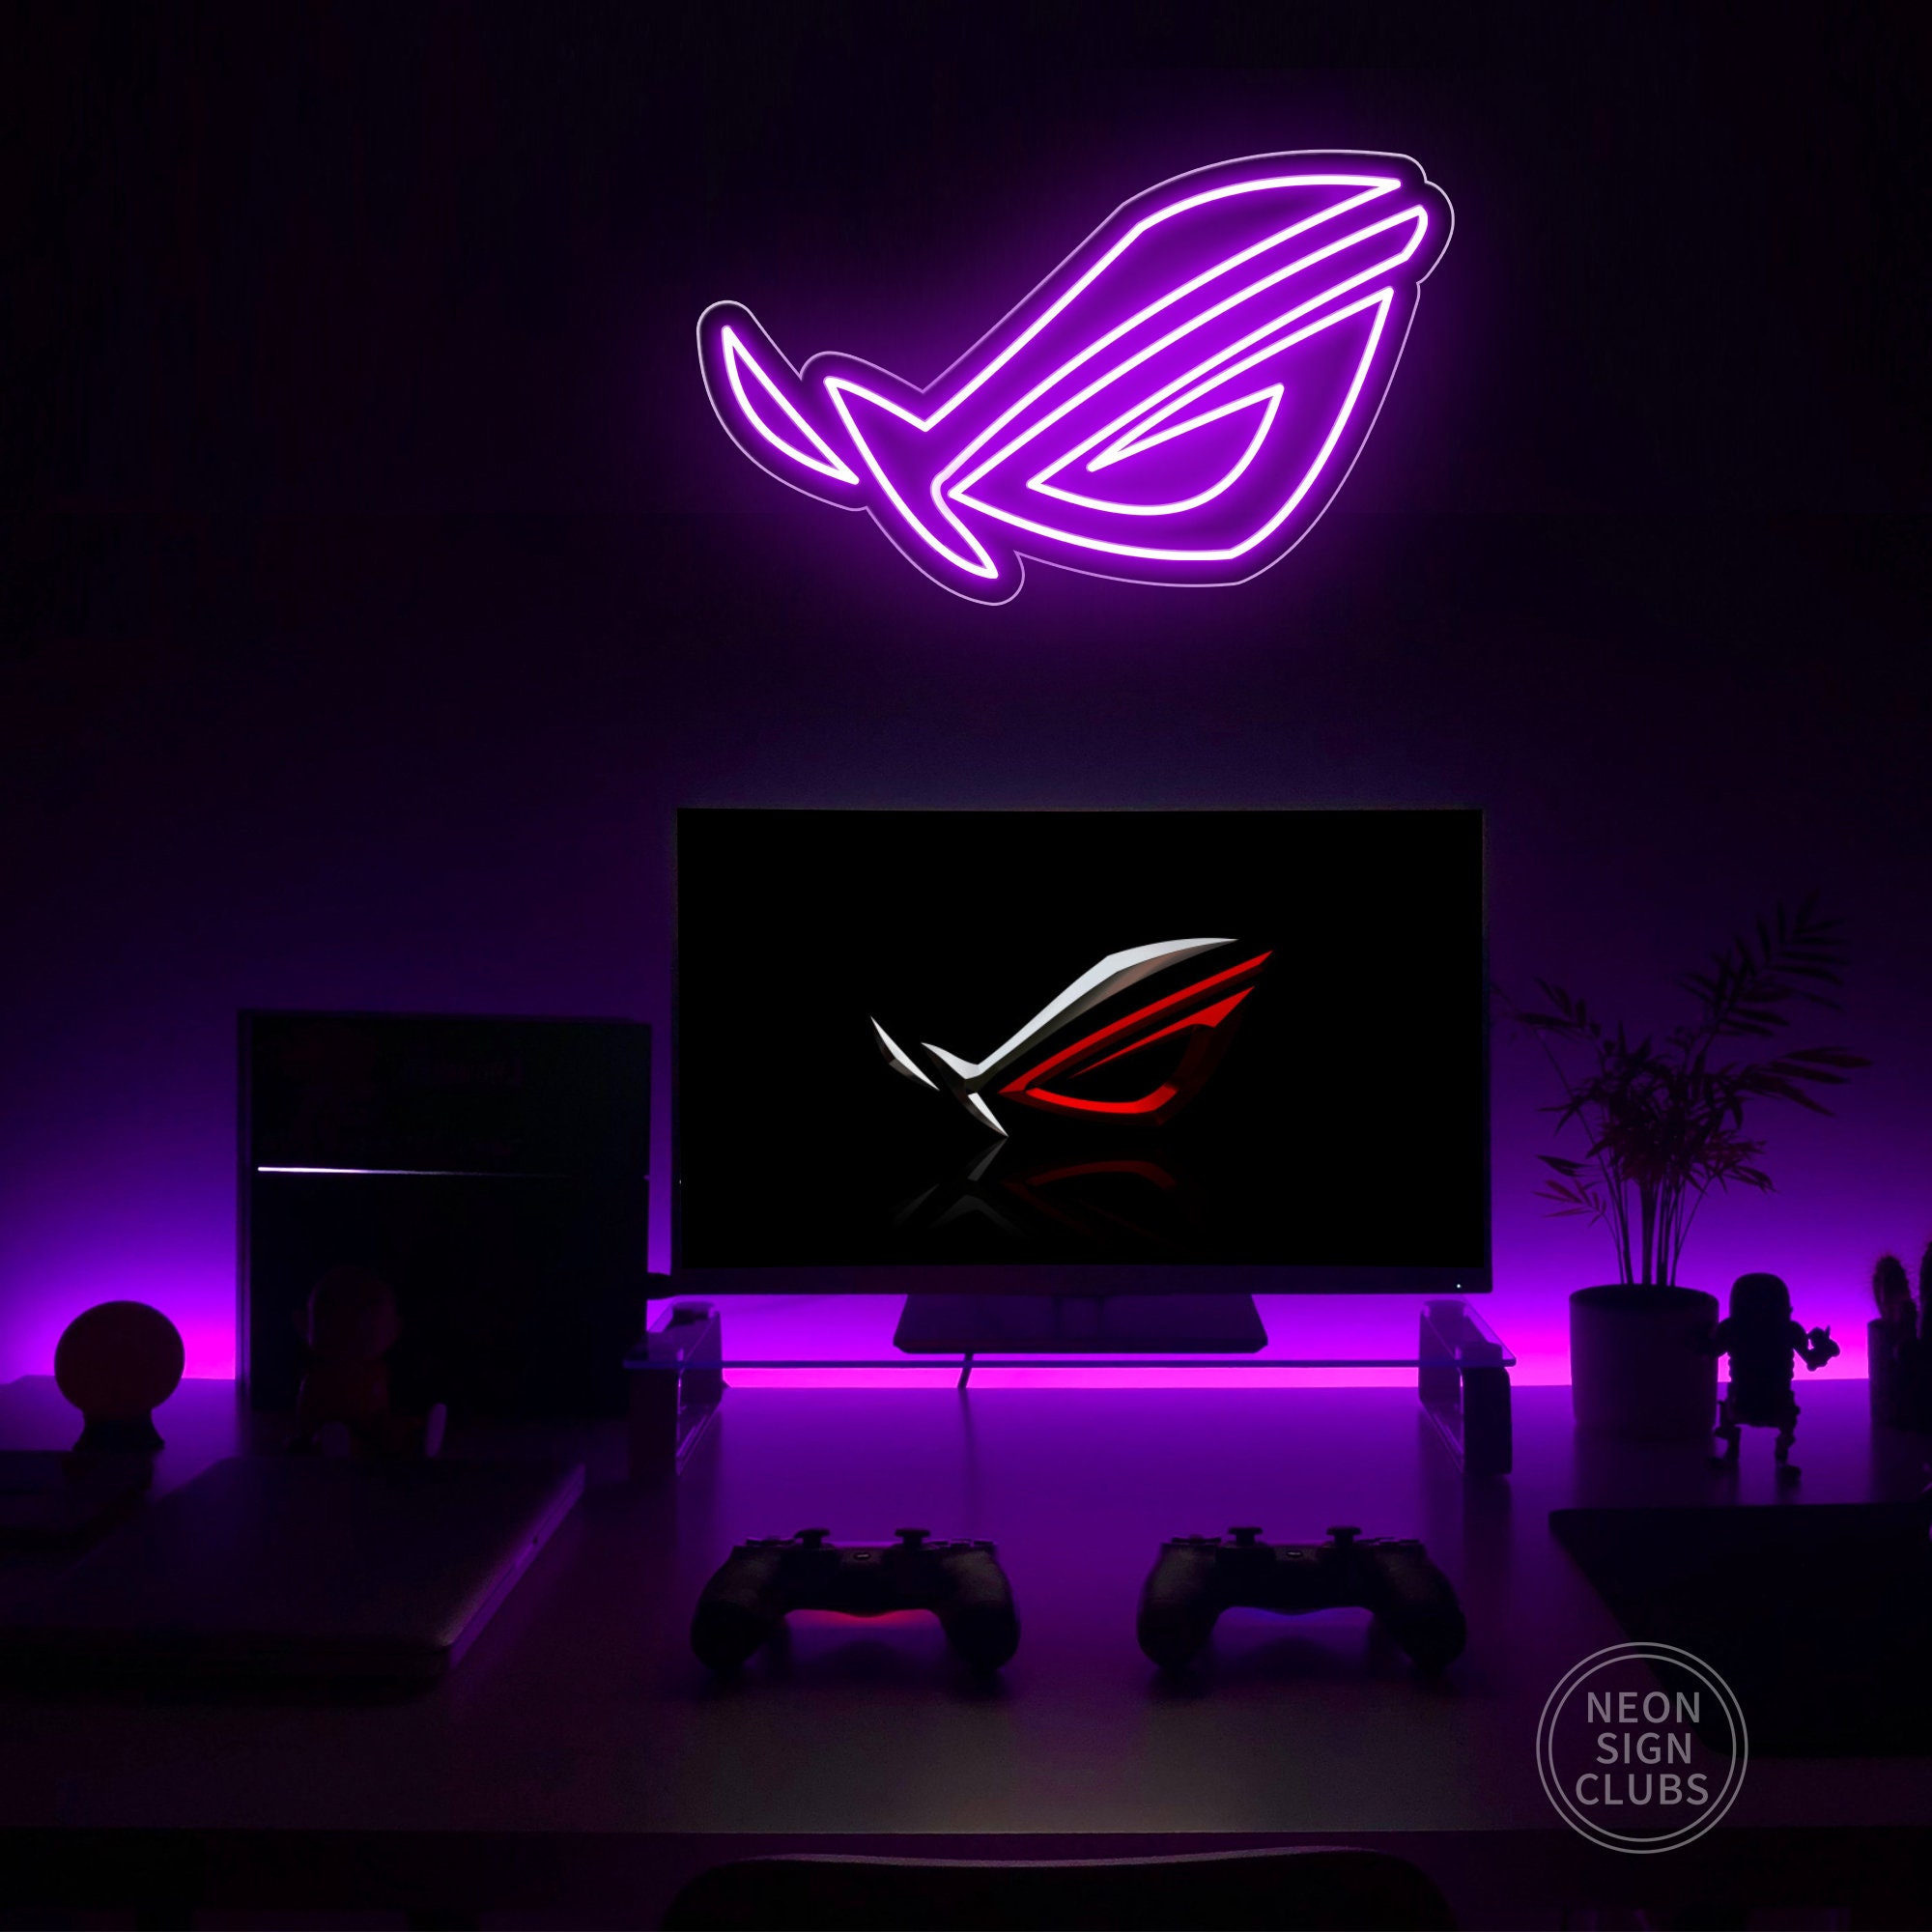 Republic of Gamers Asus Gaming, Game Room Decor, ROG LED Neon Sign